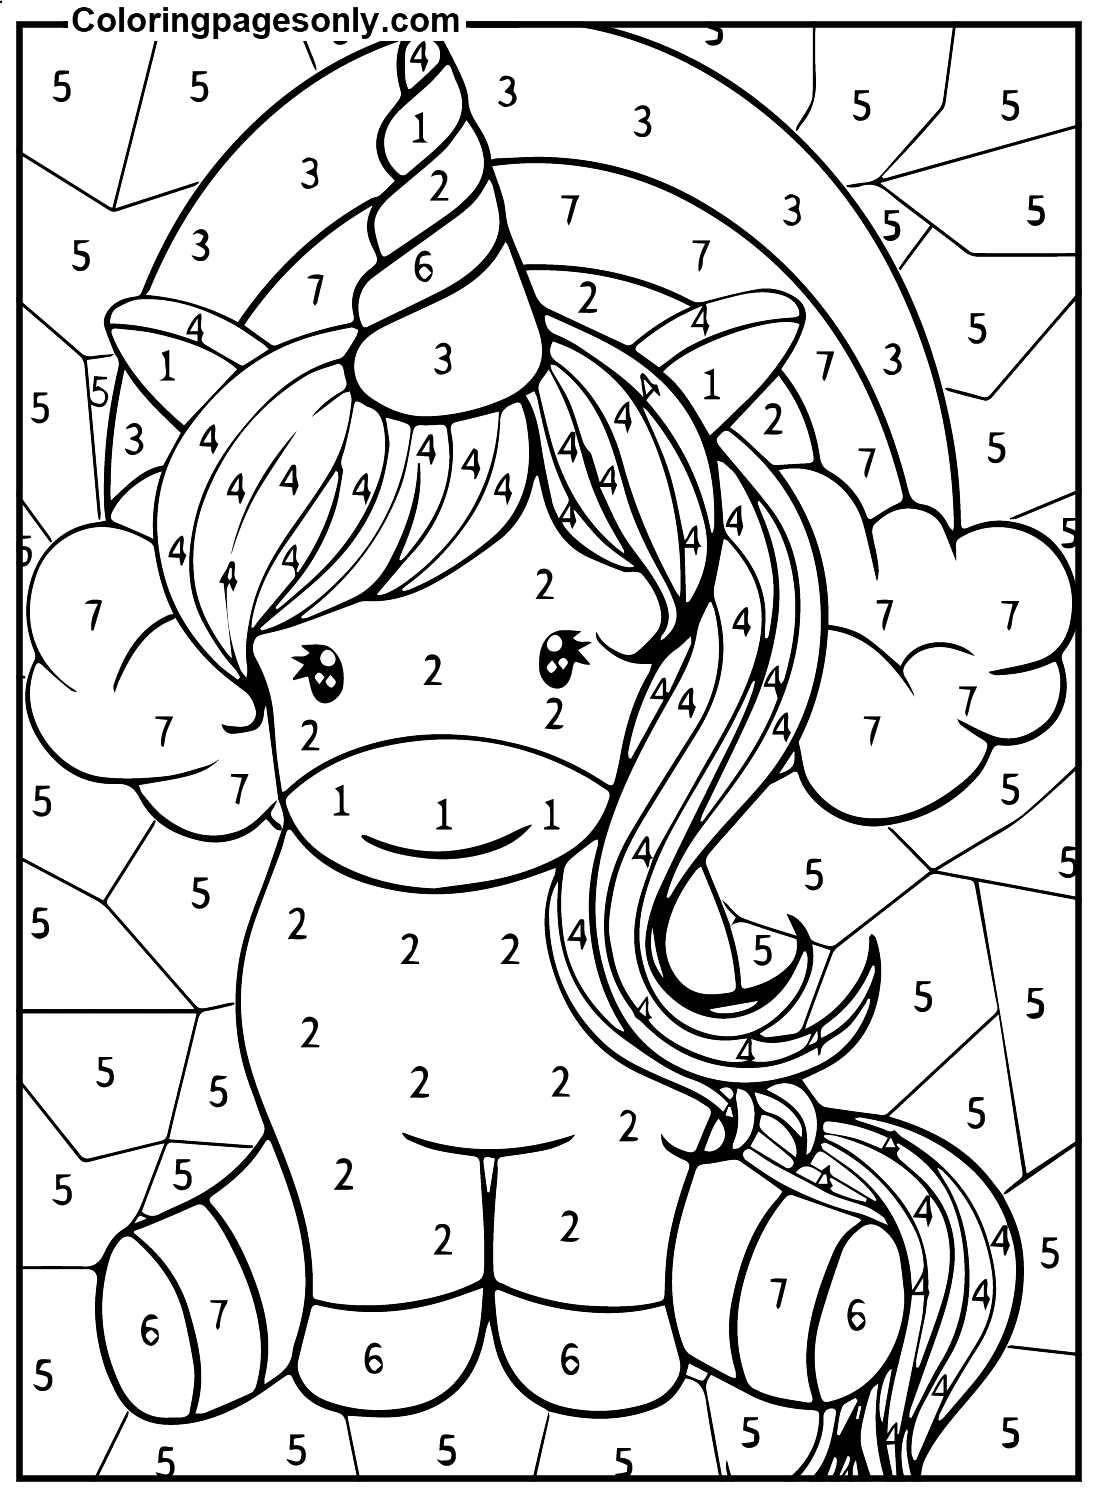 20 Unicorn Color By Number Coloring Pages - ColoringPagesOnly.com